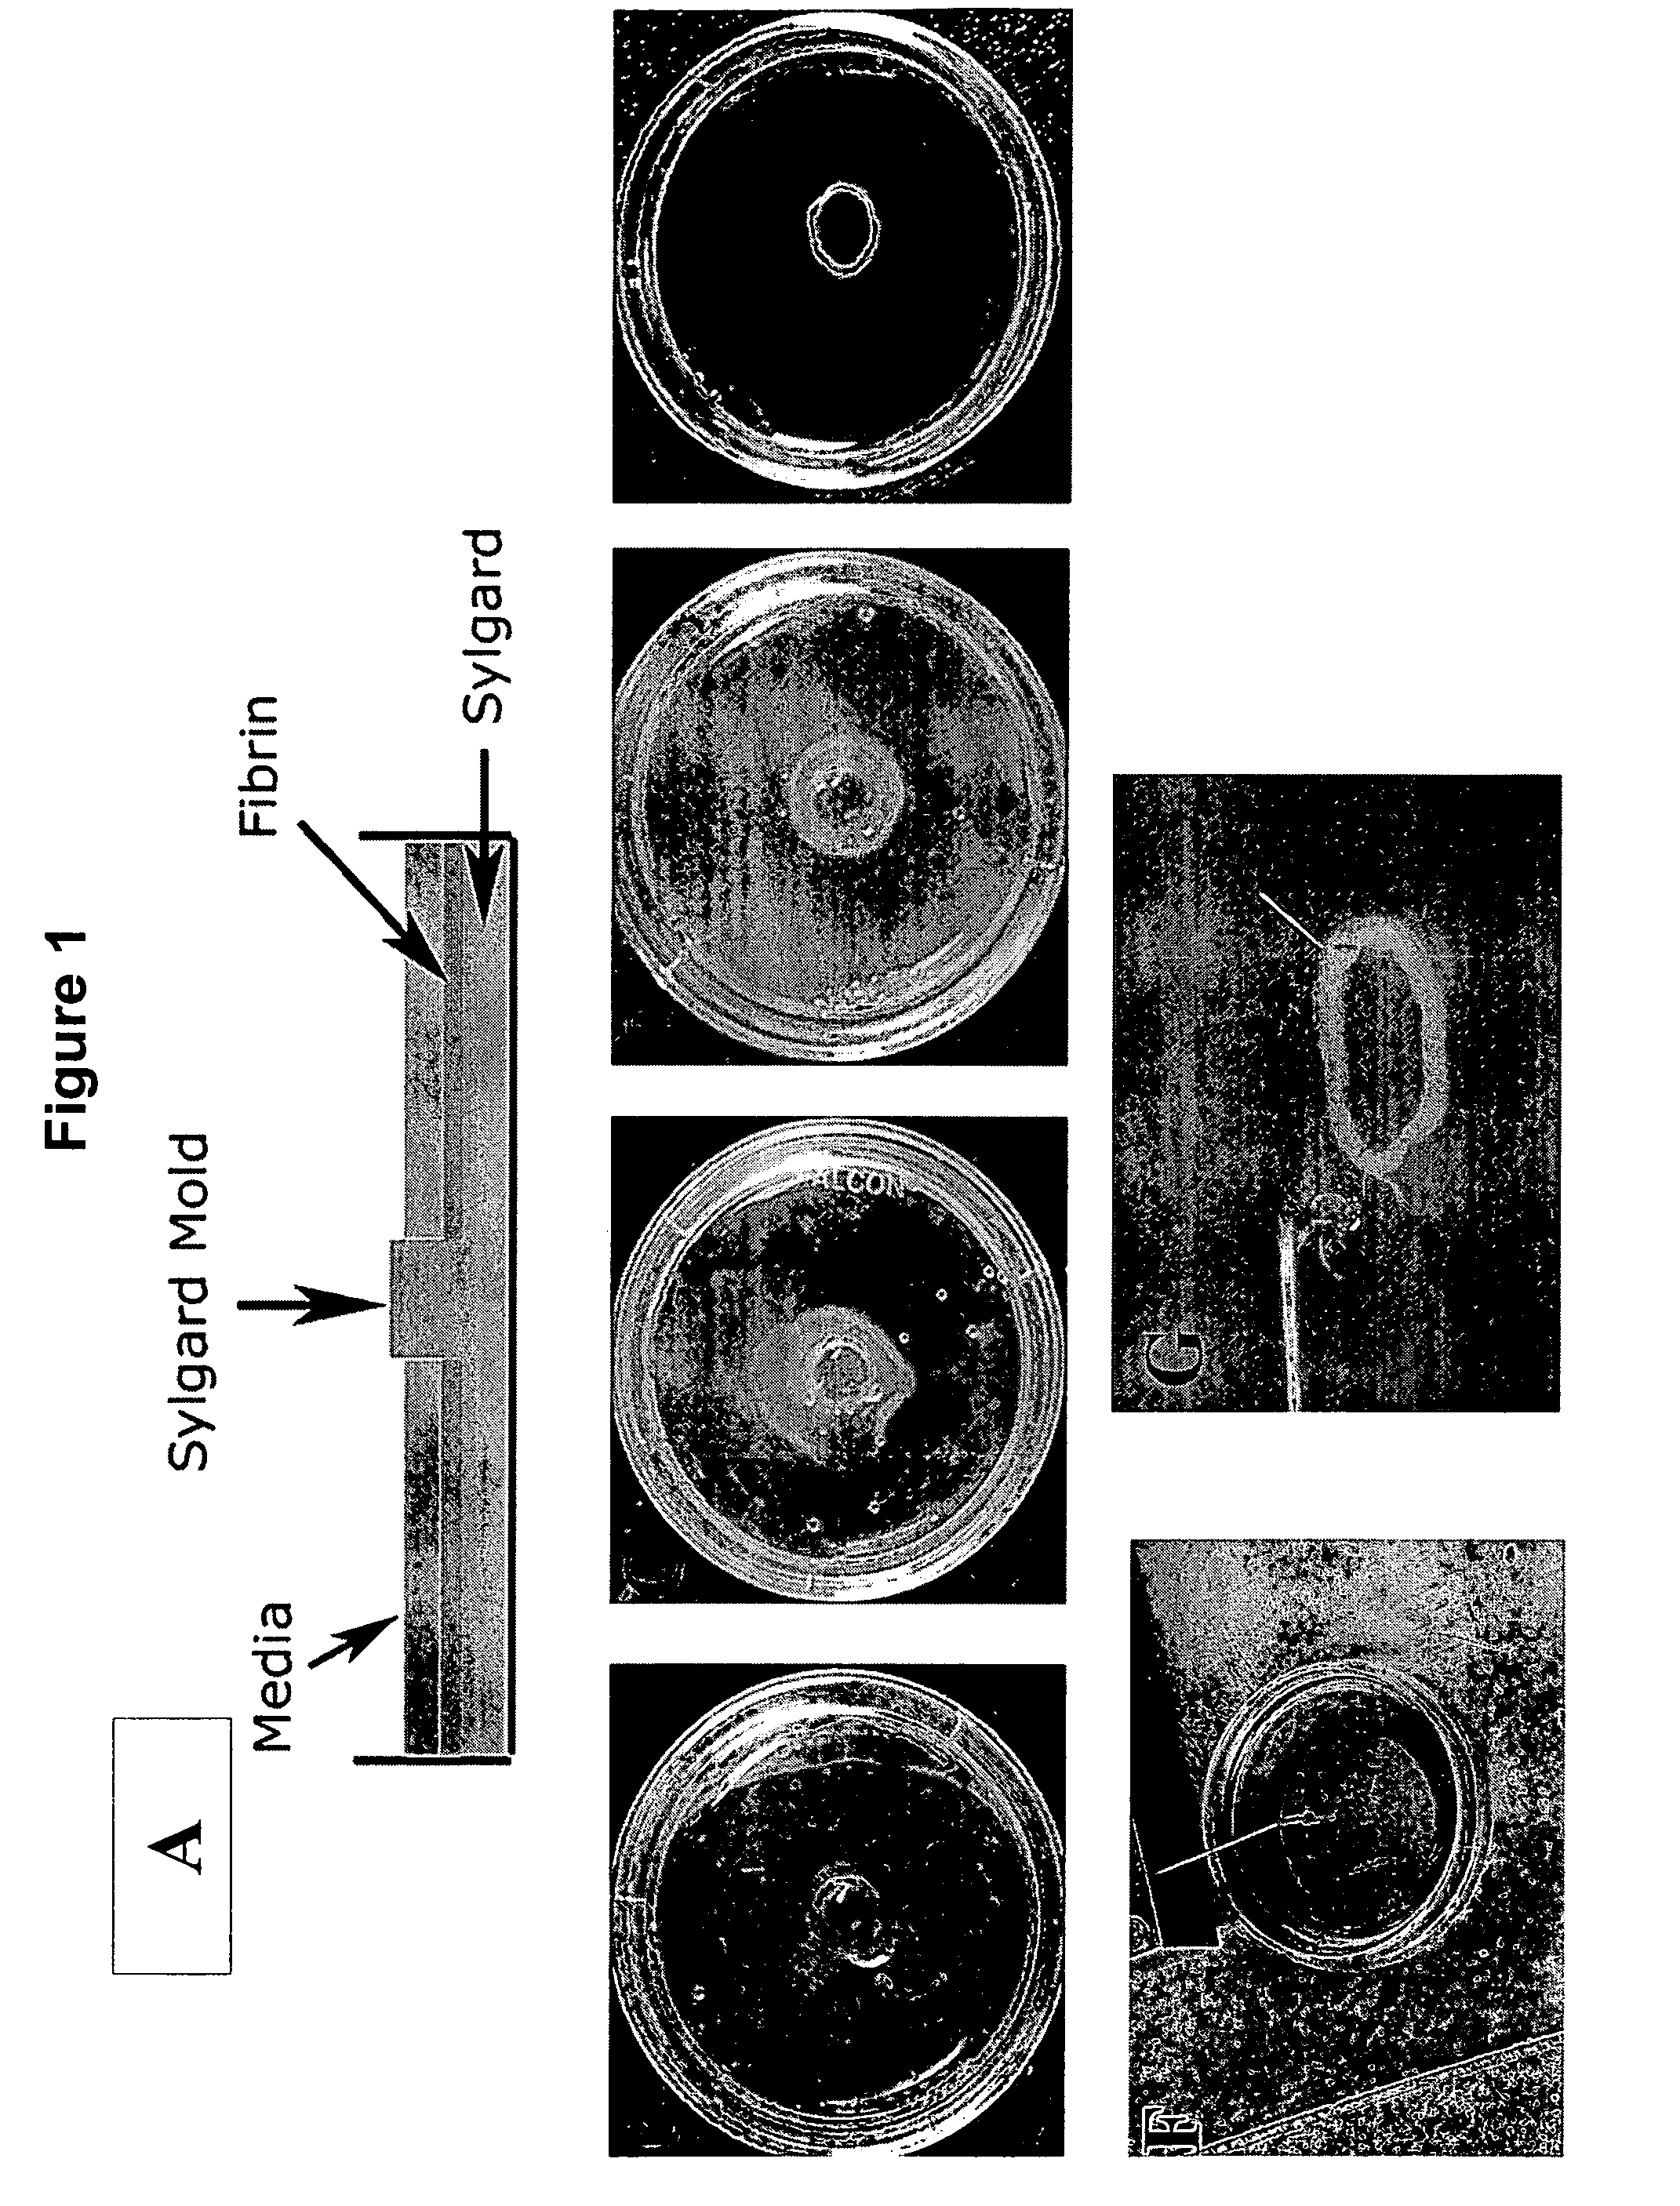 Three dimensional bioengineered smooth muscle tissue and sphincters and methods therefor